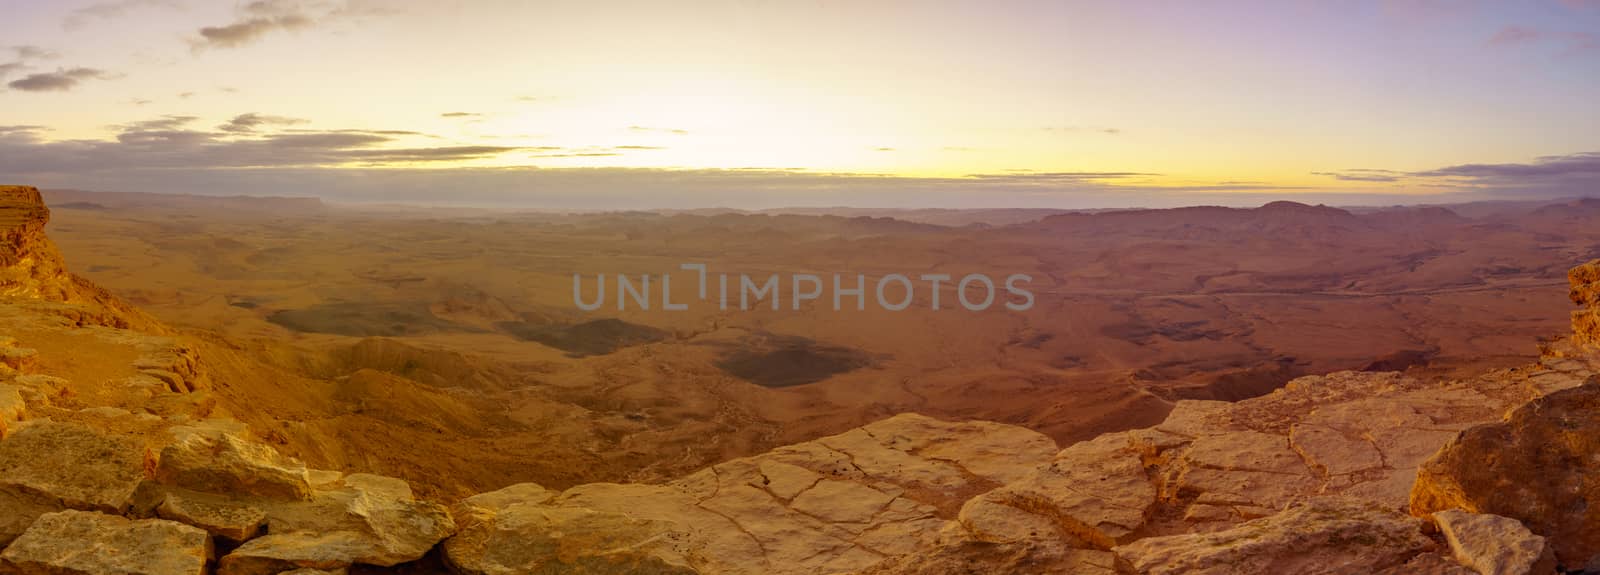 Panoramic sunrise view of Makhtesh (crater) Ramon, in the Negev Desert, Southern Israel. It is a geological landform of a large erosion cirque